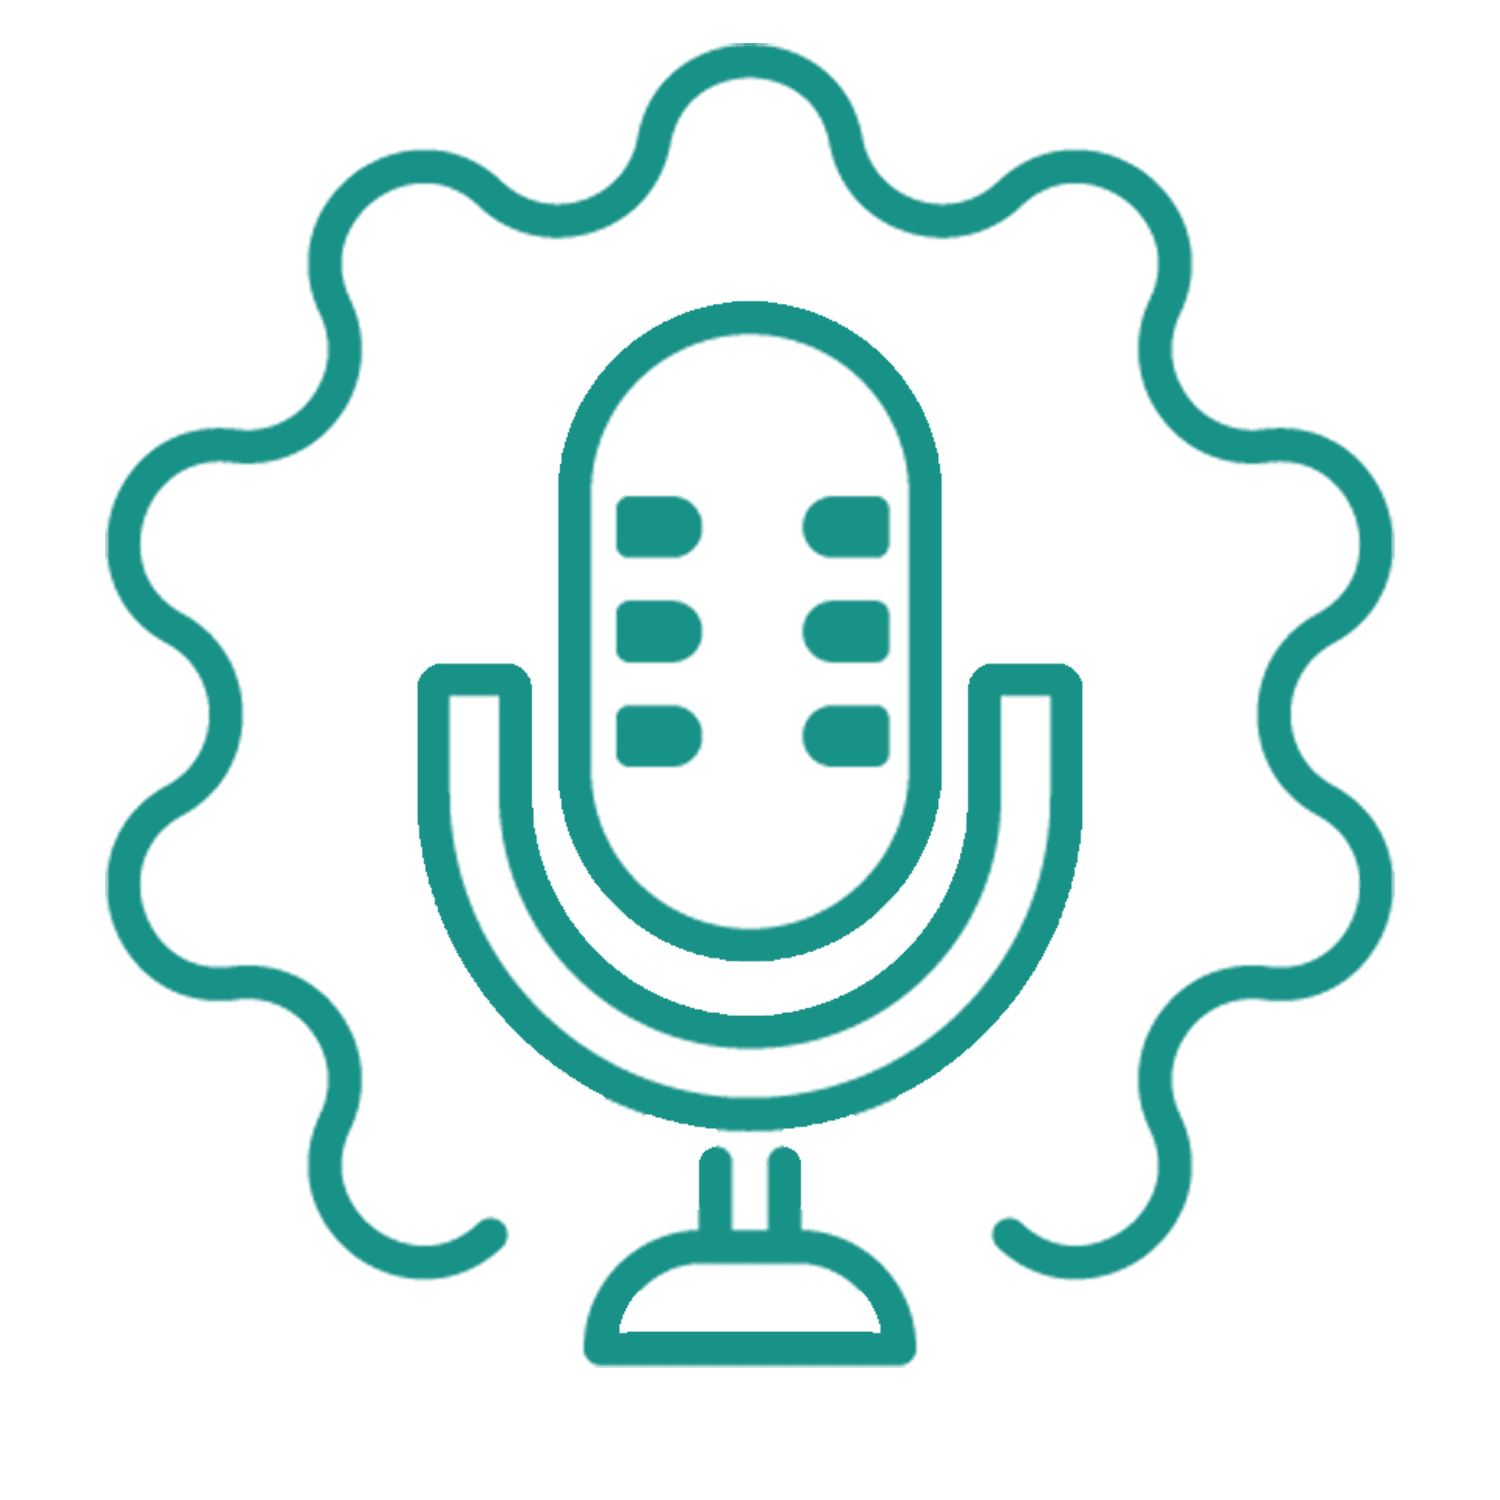 Podcasting Services for Political Candidates